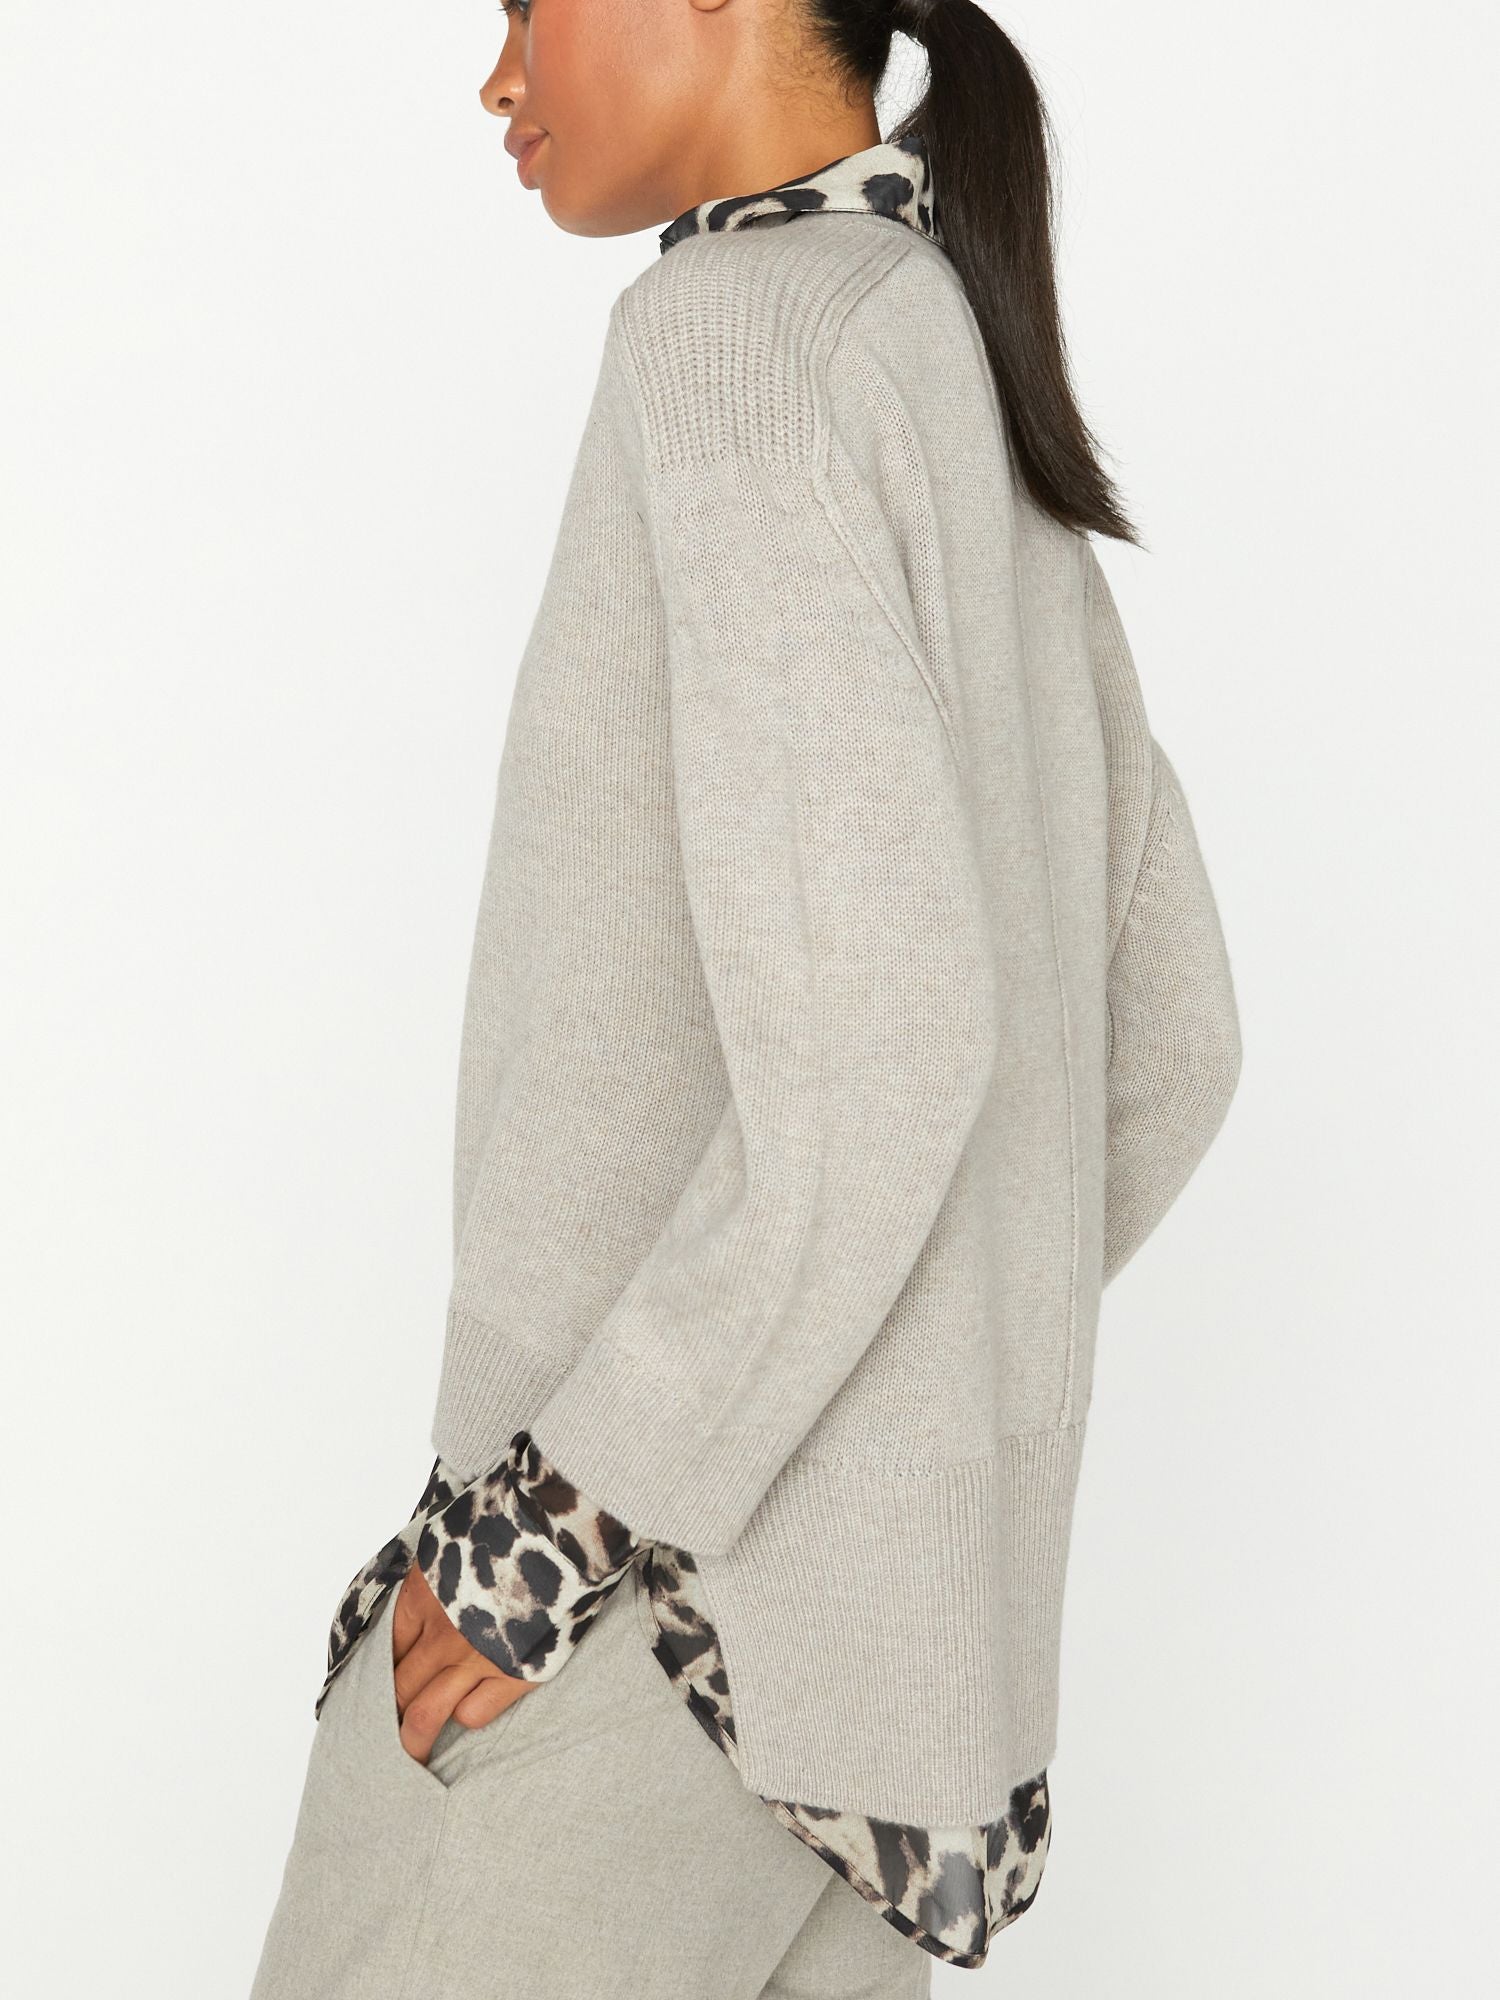 Looker light grey with animal leopard print layered v-neck sweater side view